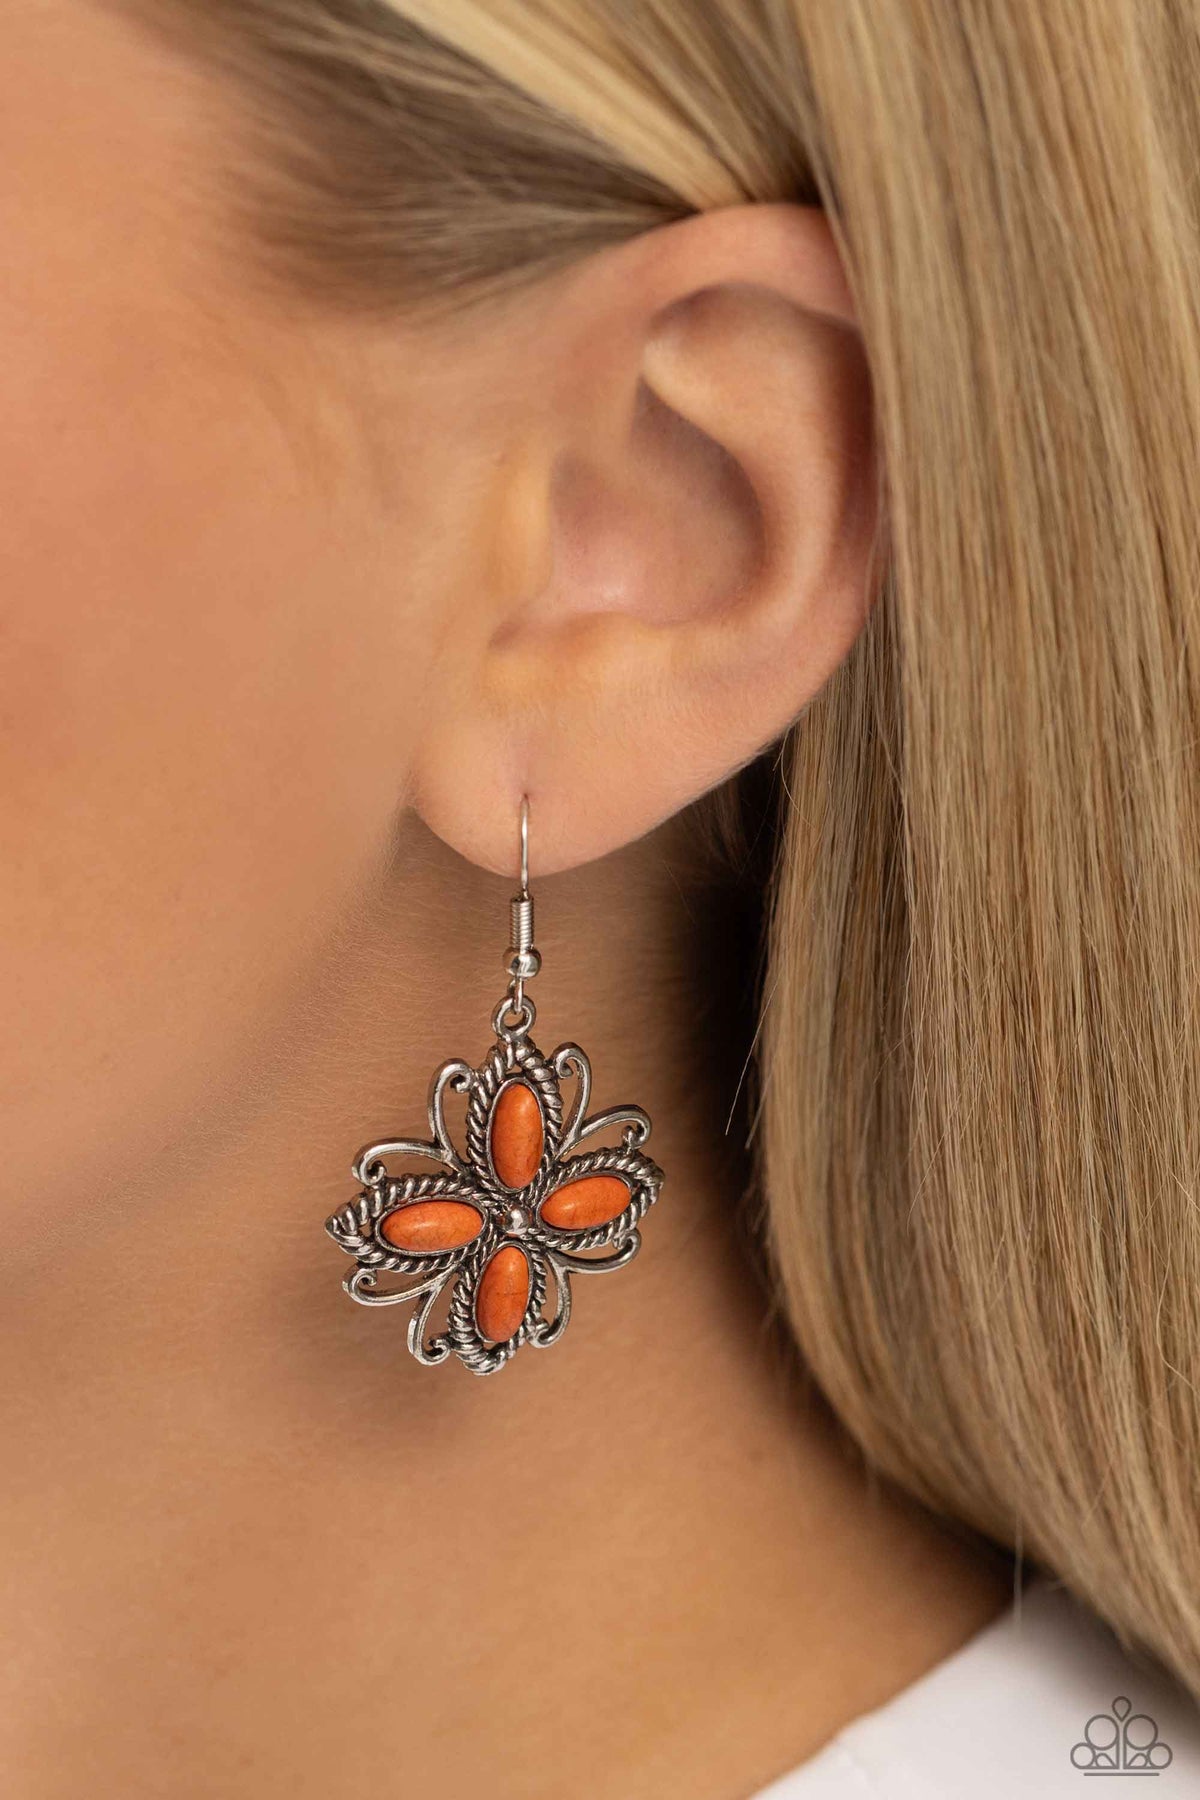 Badlands Ballad Orange Stone Floral Earrings - Paparazzi Accessories-on model - CarasShop.com - $5 Jewelry by Cara Jewels